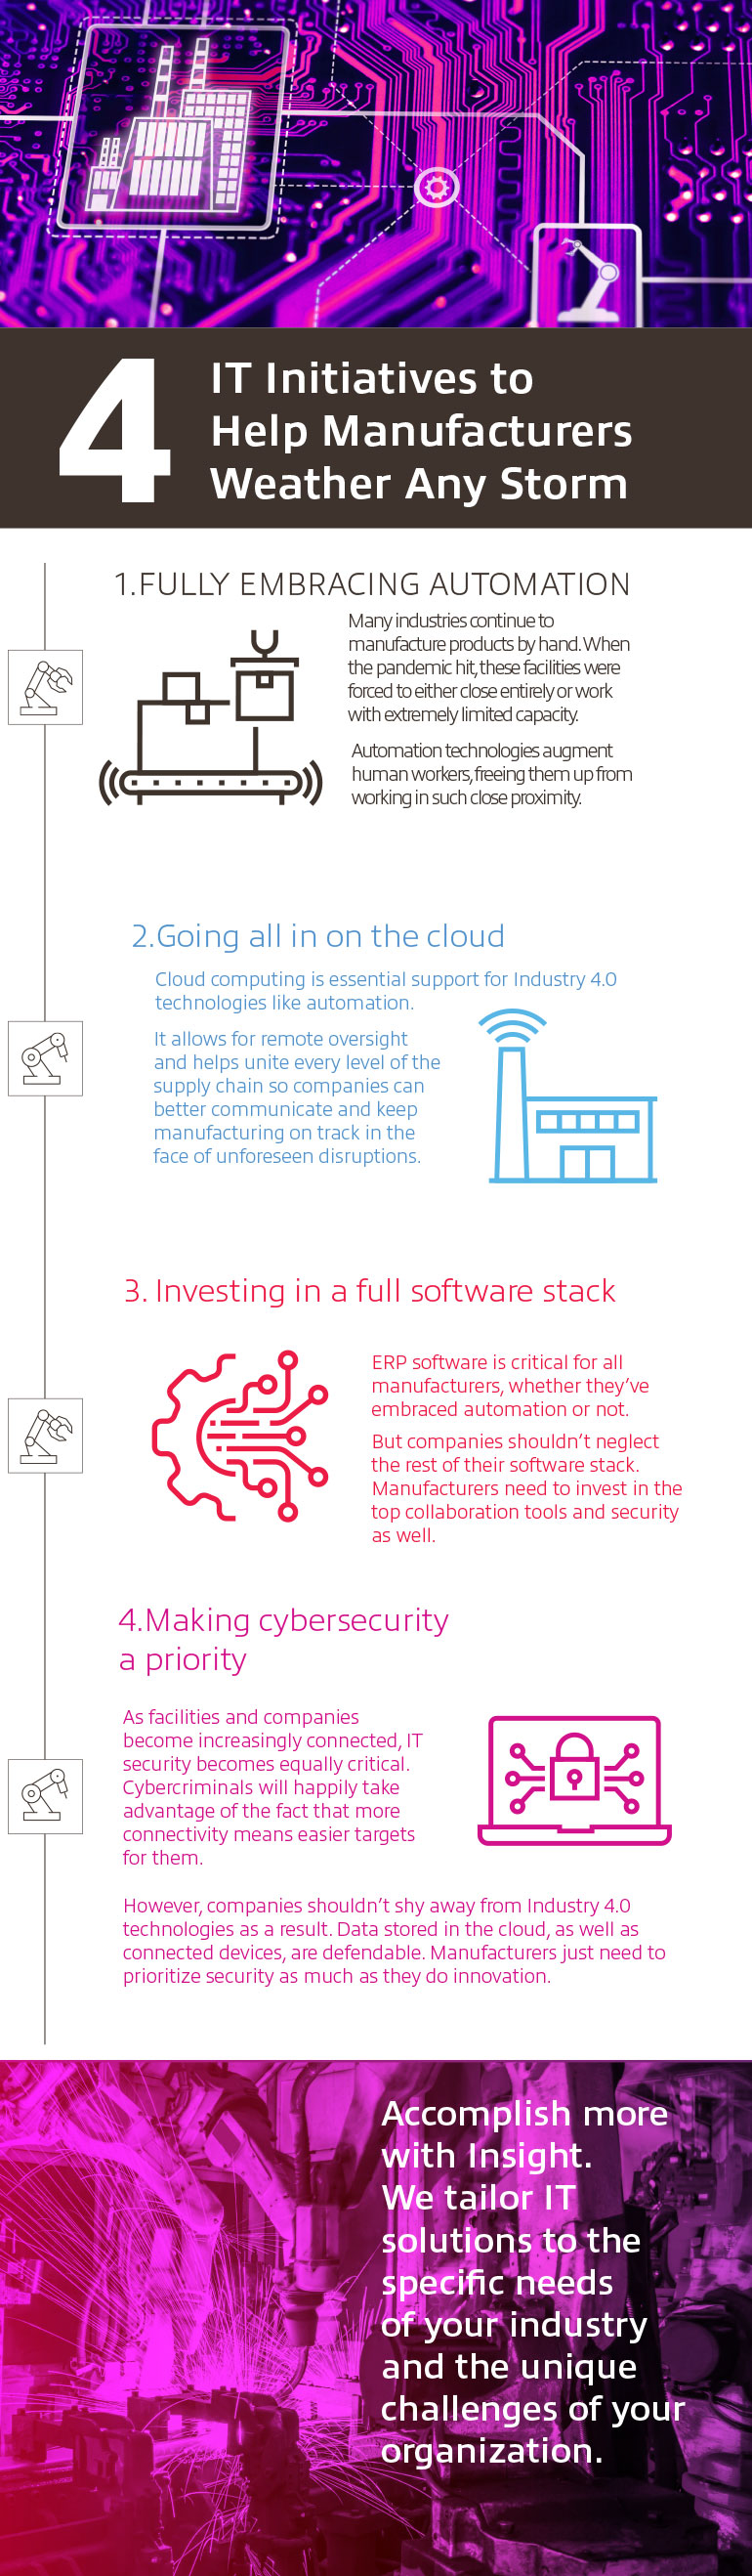 4 IT Initiatives to Help Manufacturers Weather Any Storm infographic